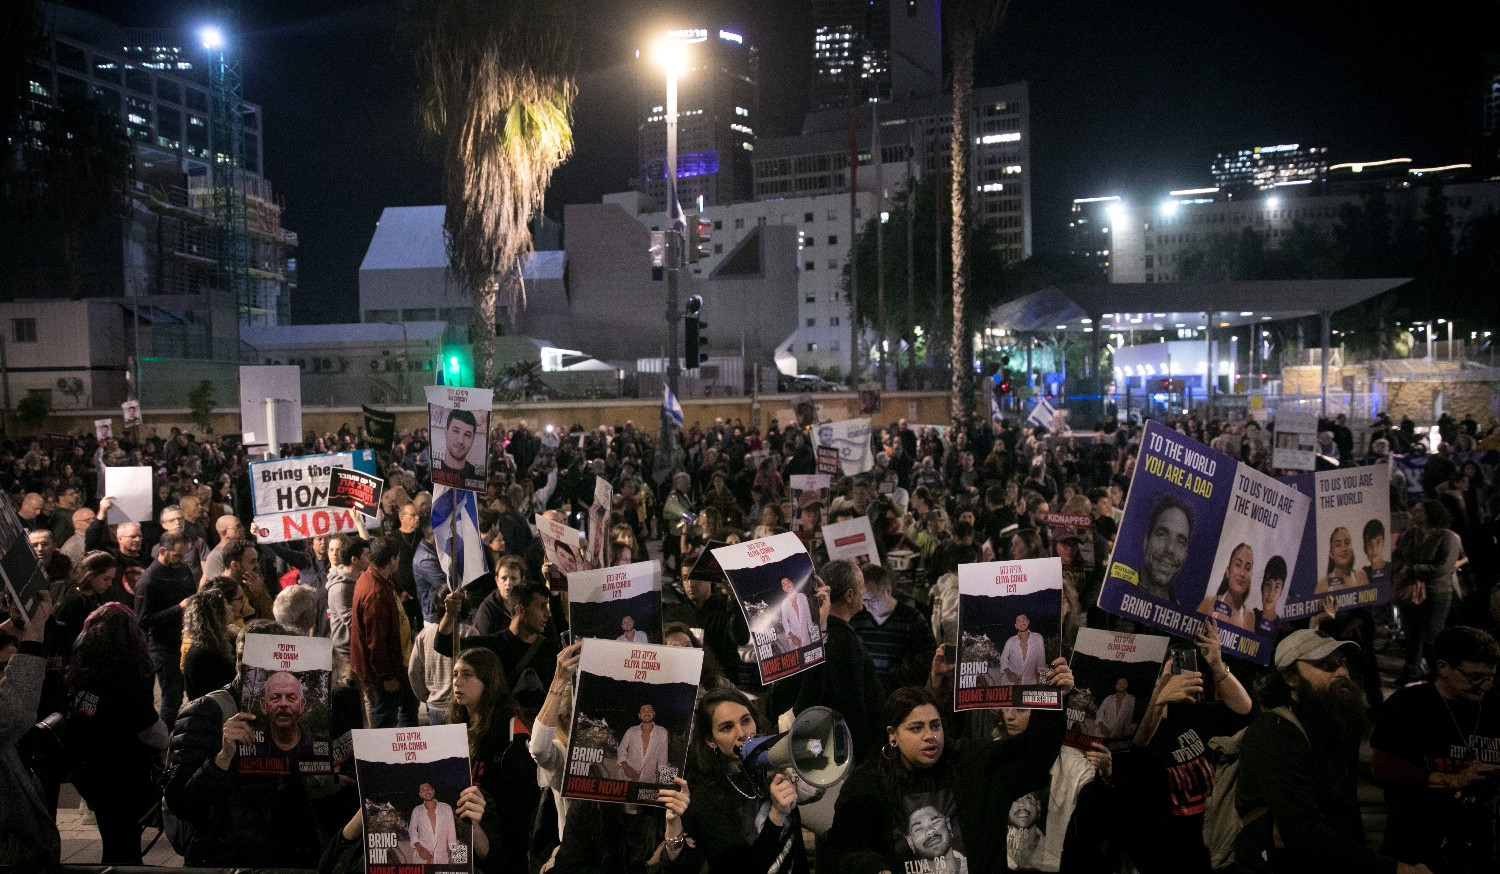 'It struck me in the heart' - Hundreds protest in Tel Aviv after Israeli forces kill three hostages by mistake